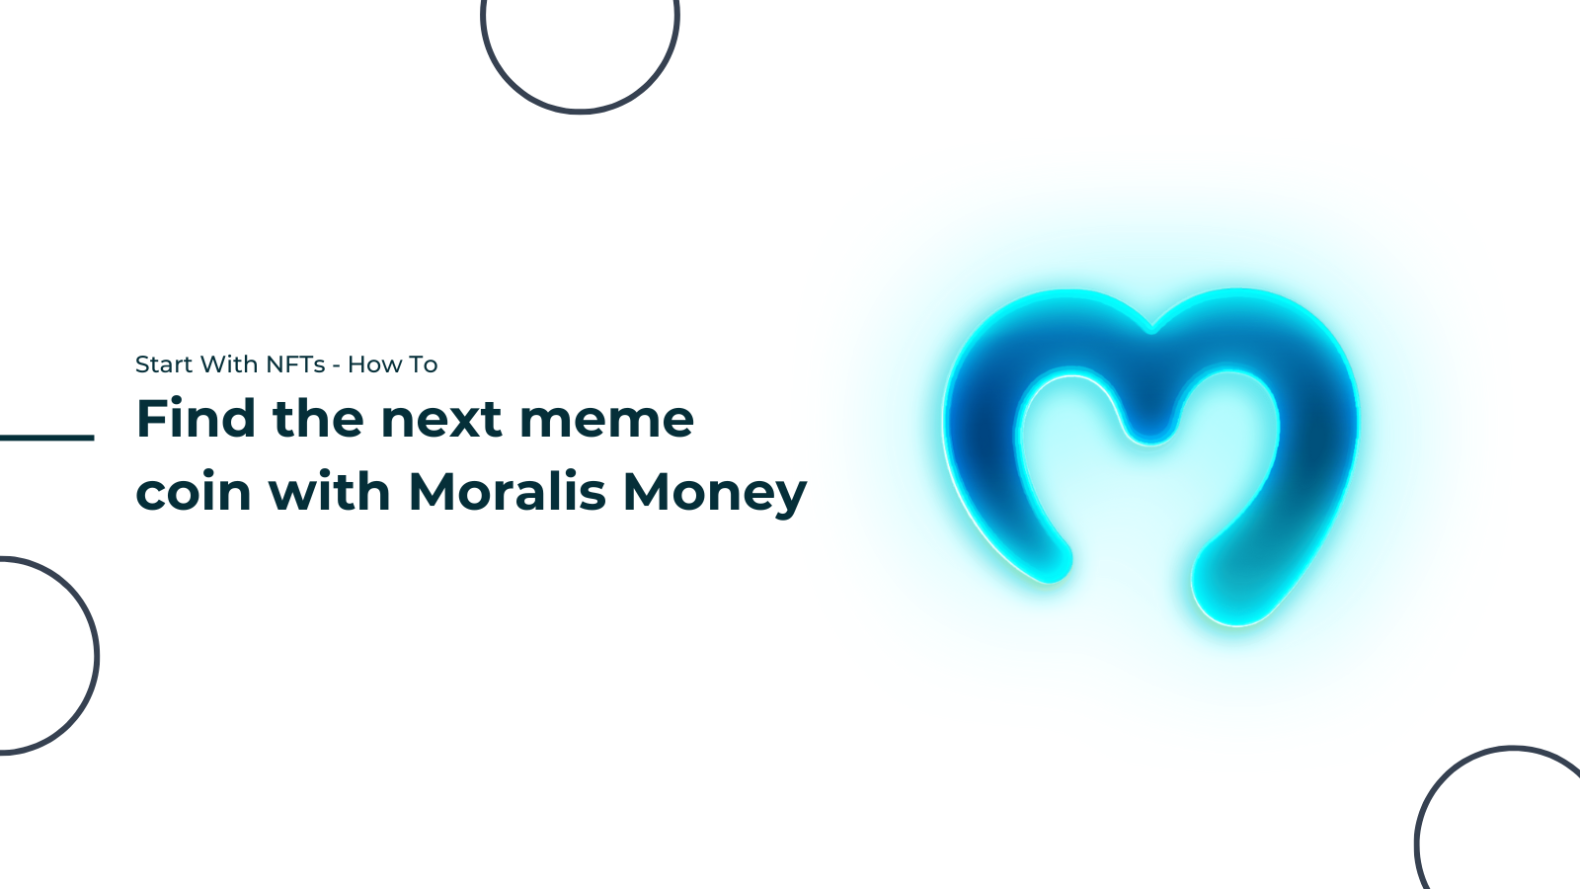 How To Find the new Meme Coins that will Explode with Moralis Money? Get the next $PEPE before it goes mainstream!